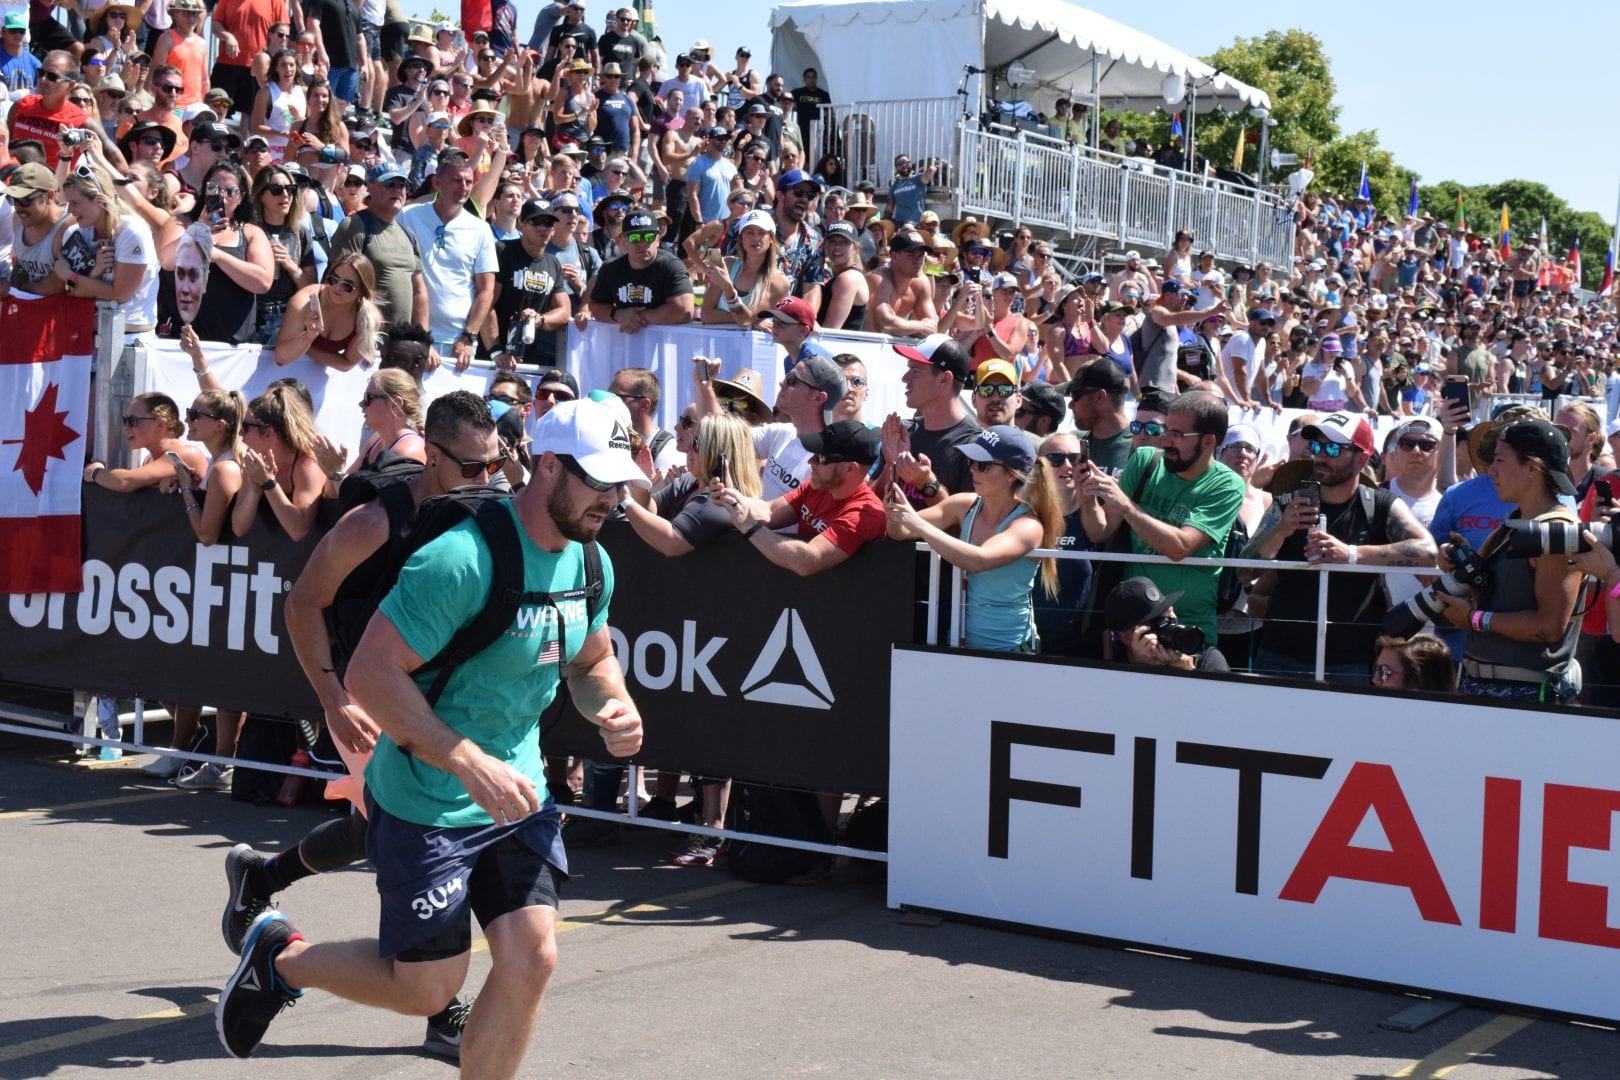 Sean Sweeney, the CrossFit Cowboy of CrossFit Powerstroke, completes the Ruck Run event at the 2019 CrossFit Games